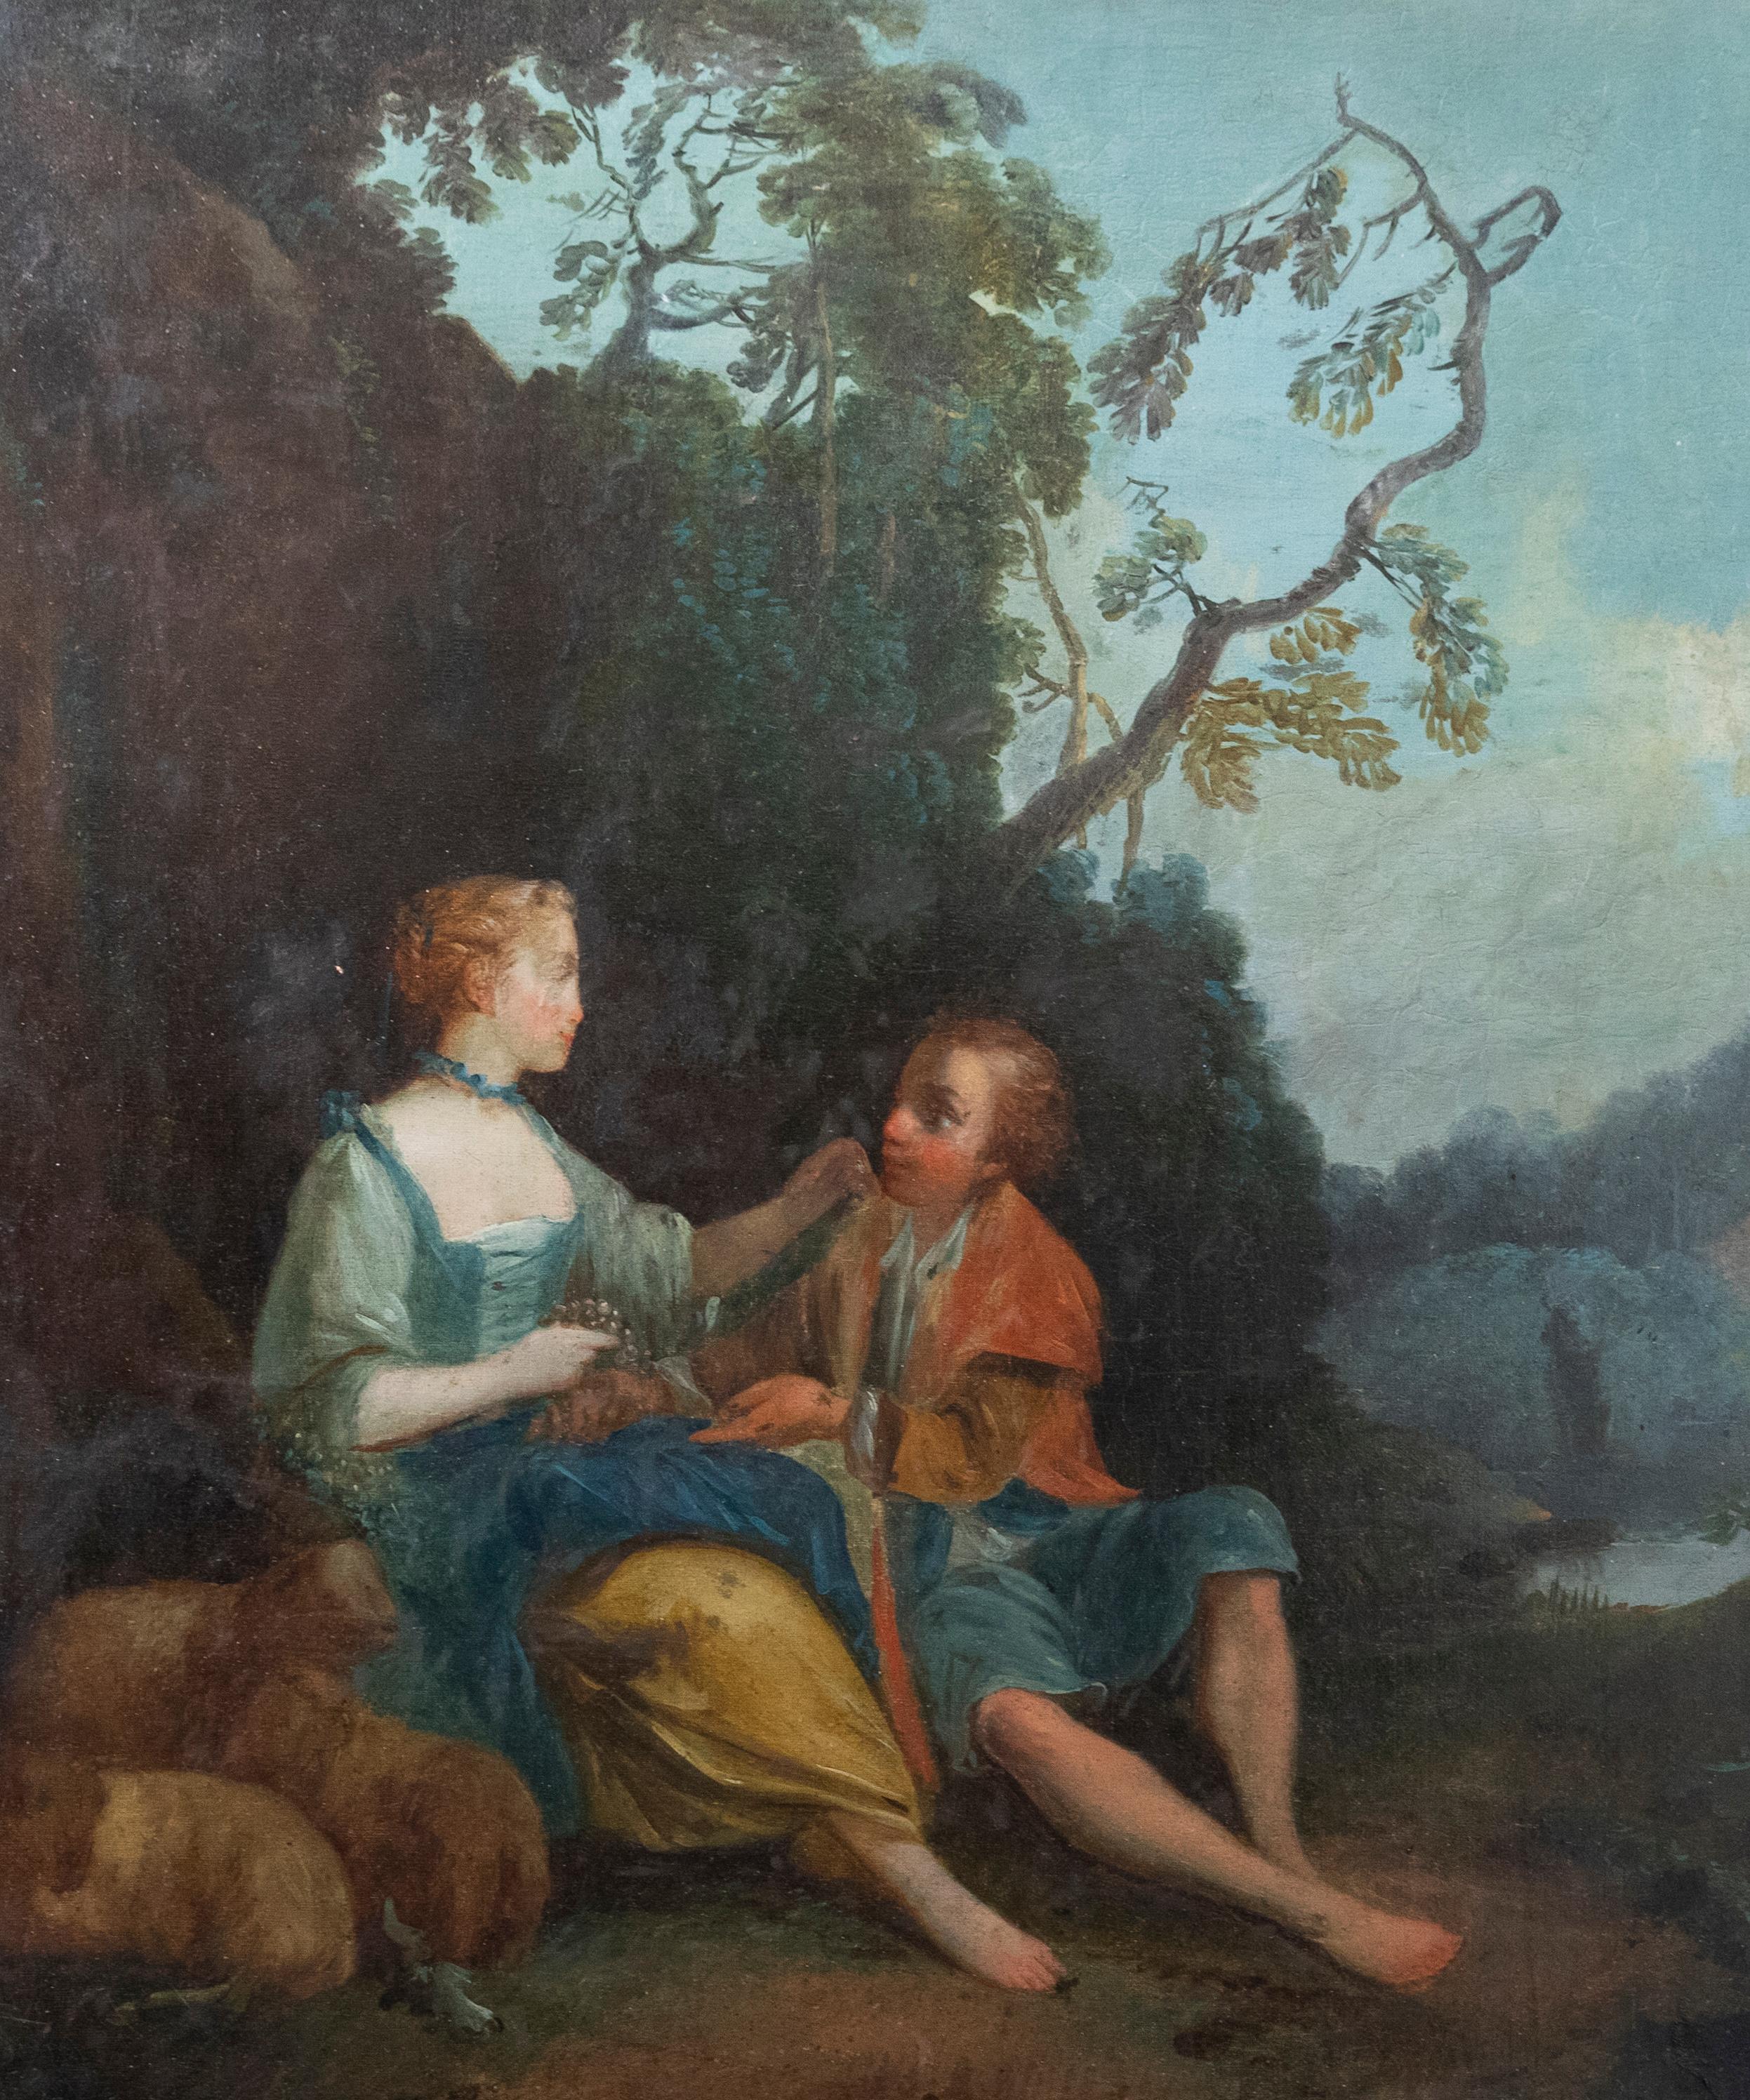 Unknown Figurative Painting - Manner of Francois Boucher - 18th Century Oil, Lovers in Autumn